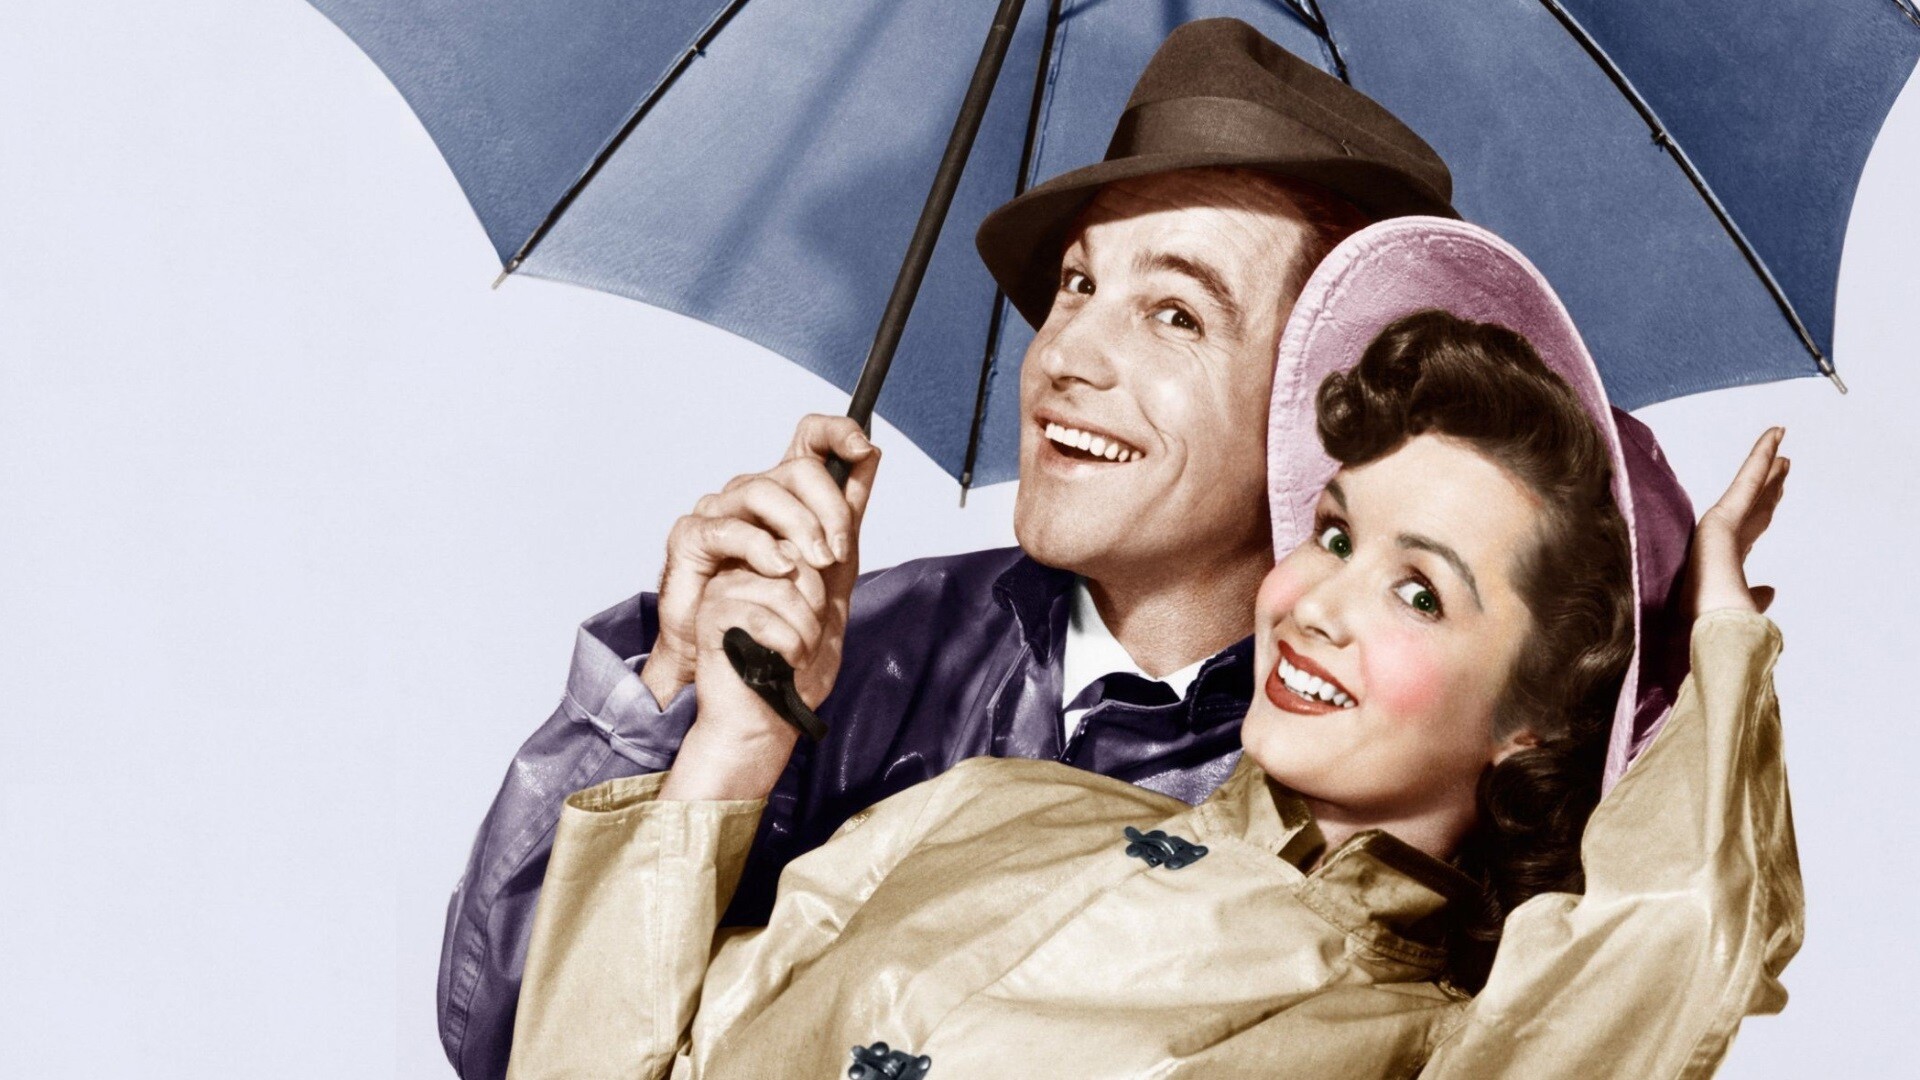 Singin' in the Rain: Gene Kelly portrayed a studio star who falls in love with an aspiring actress, played by Debbie Reynolds. 1920x1080 Full HD Background.